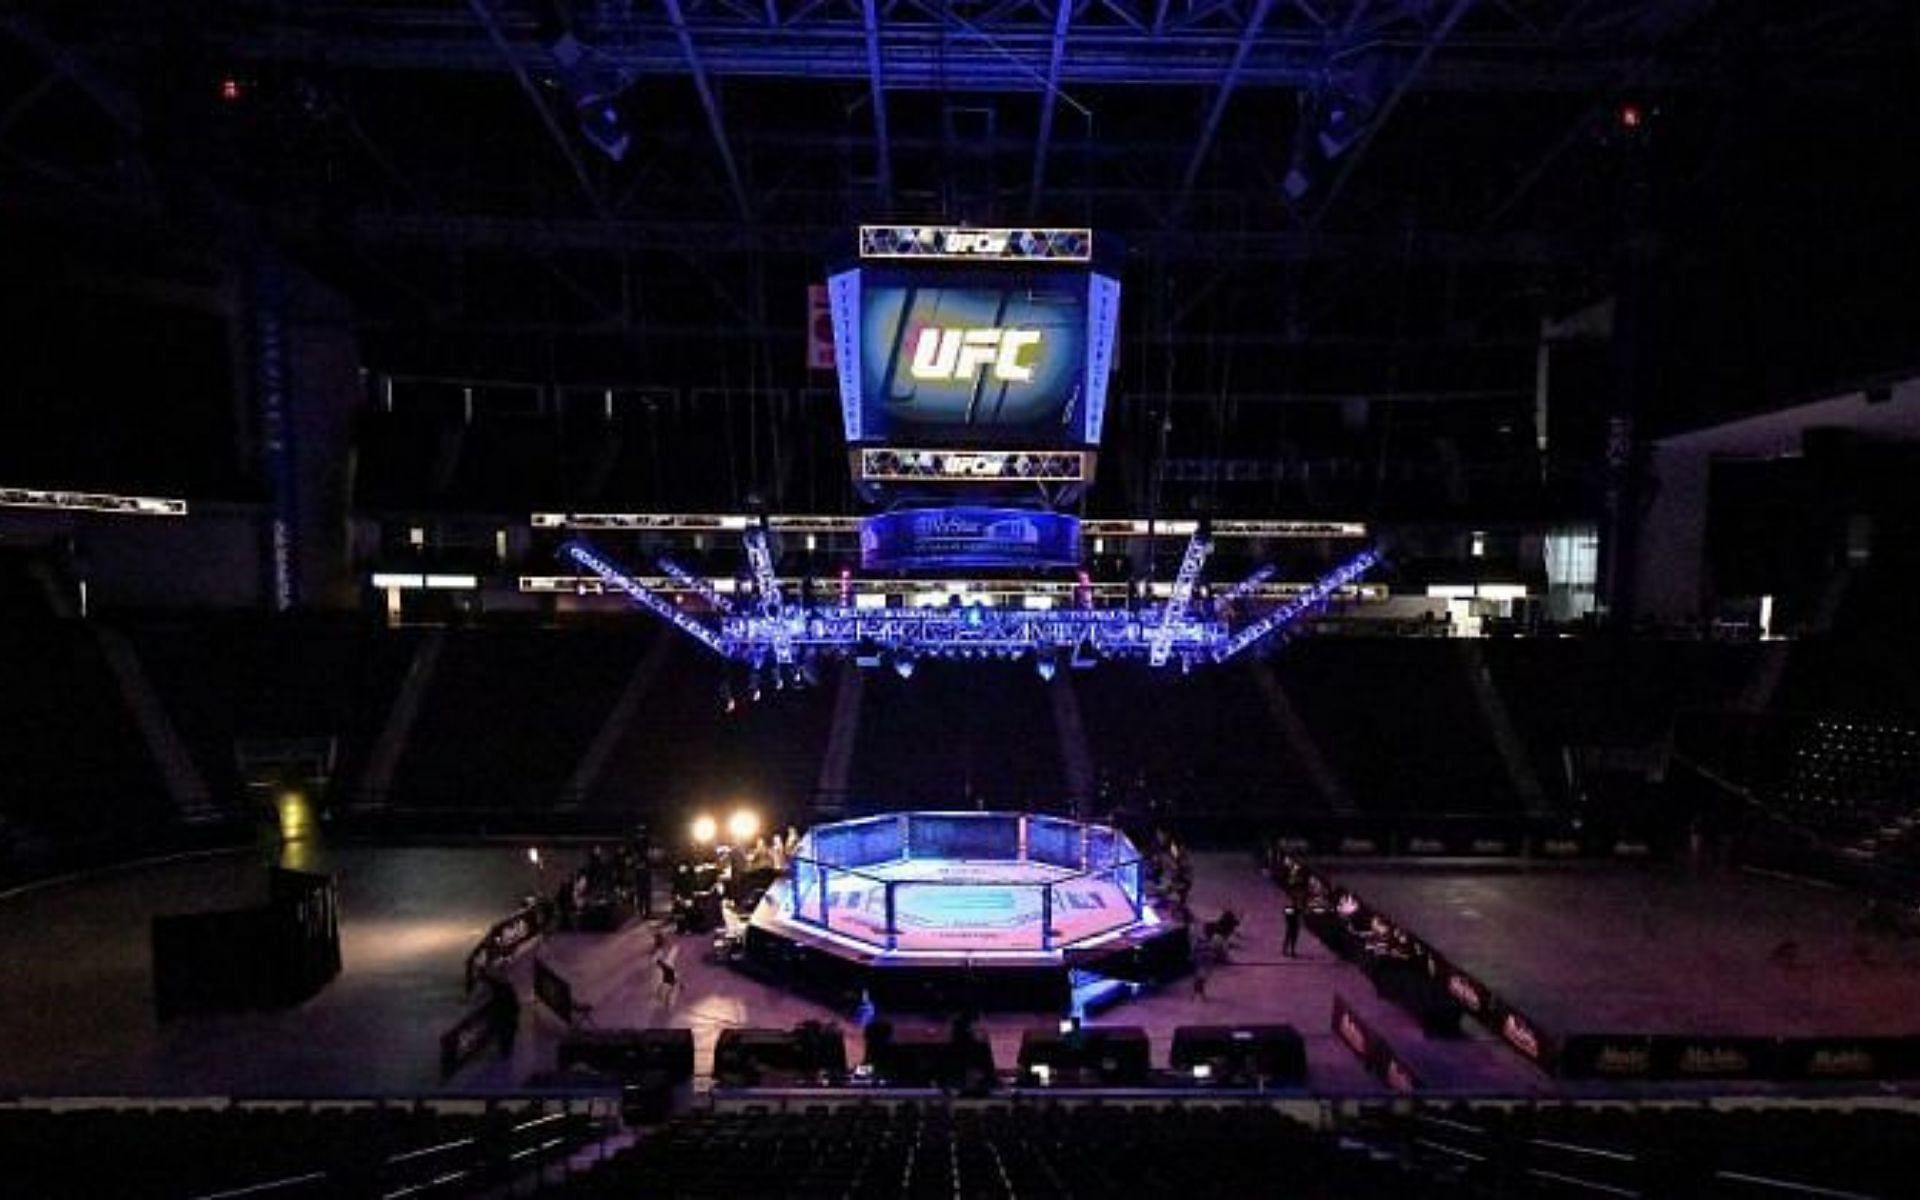 UFC 267 will take place in Abu Dhabi on October 30